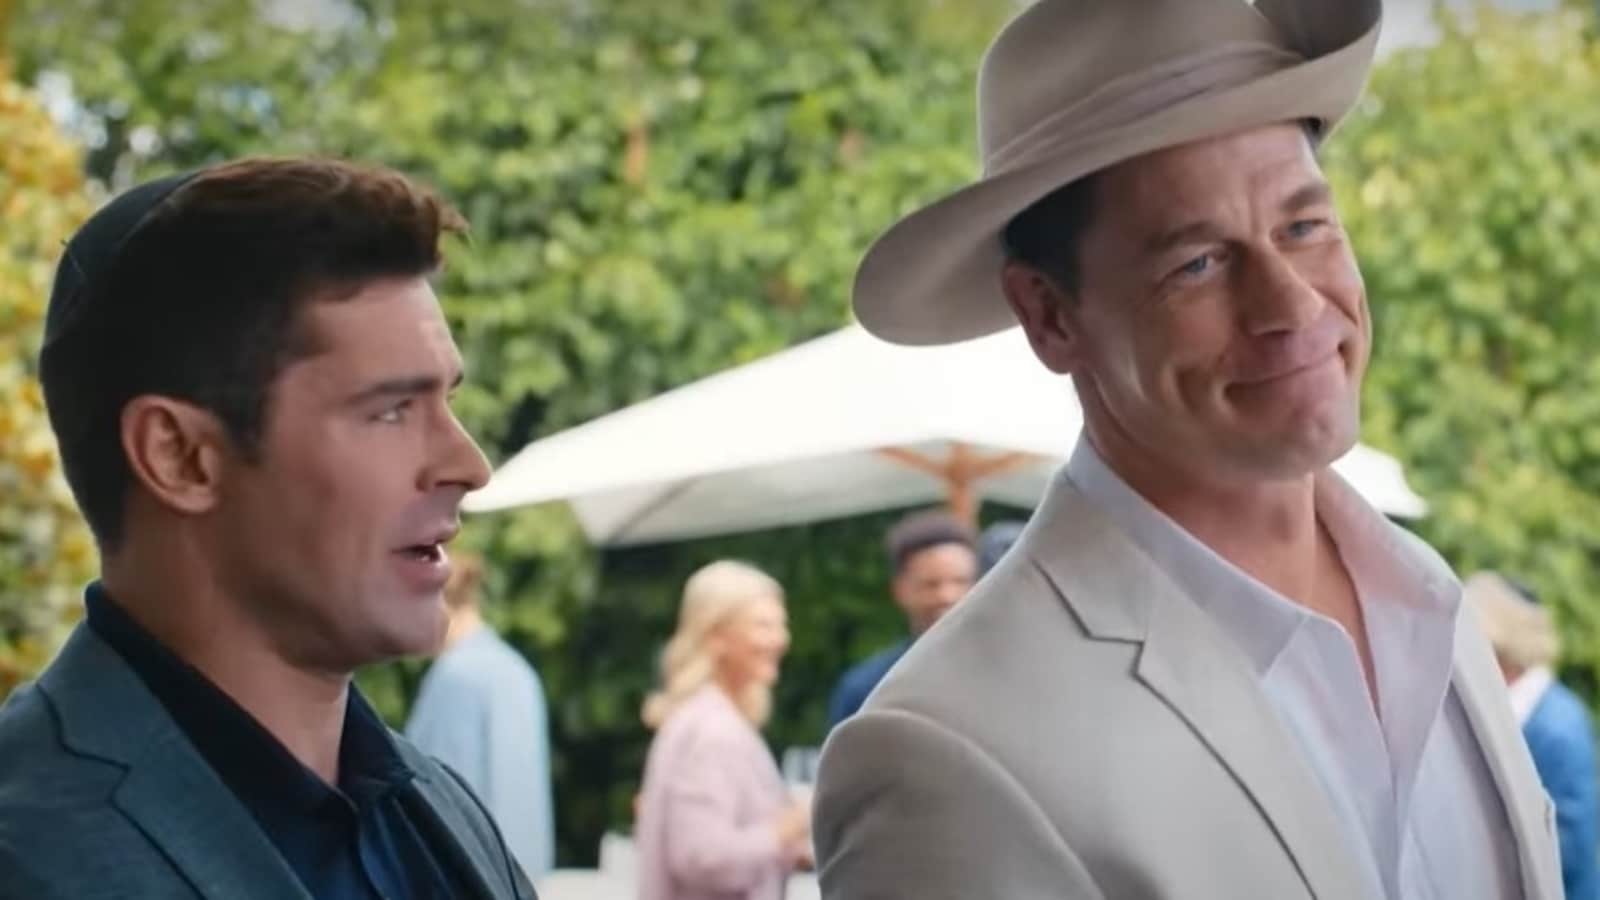 Ricky Stanicky movie review: John Cena, Zac Efron are charming in this sweet feel-good film